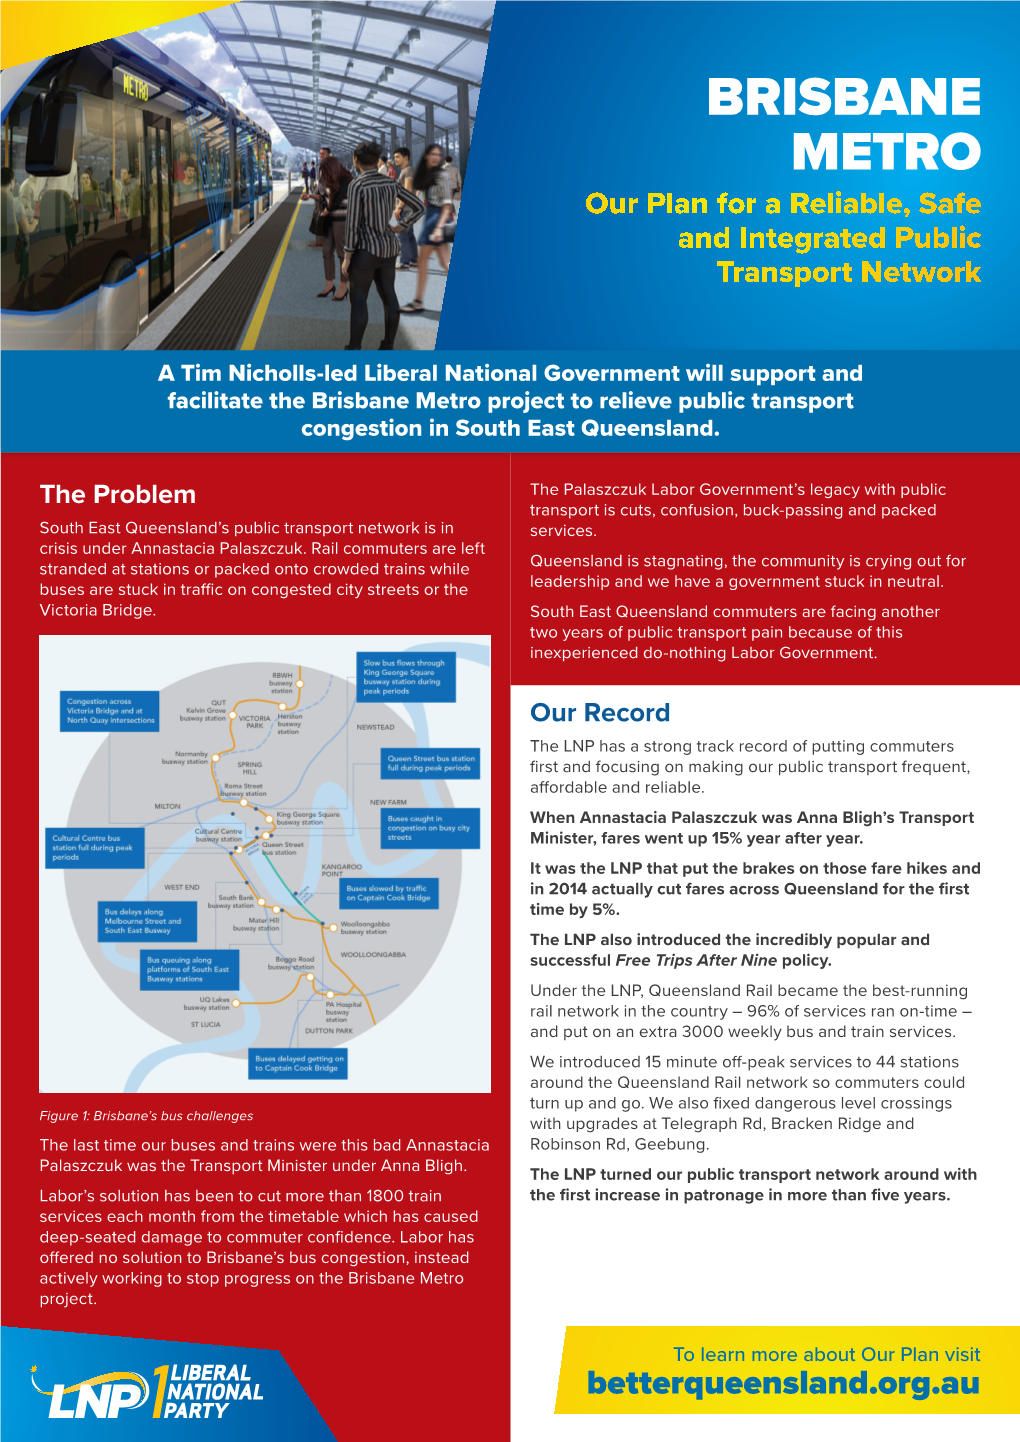 BRISBANE METRO Our Plan for a Reliable, Safe and Integrated Public Transport Network